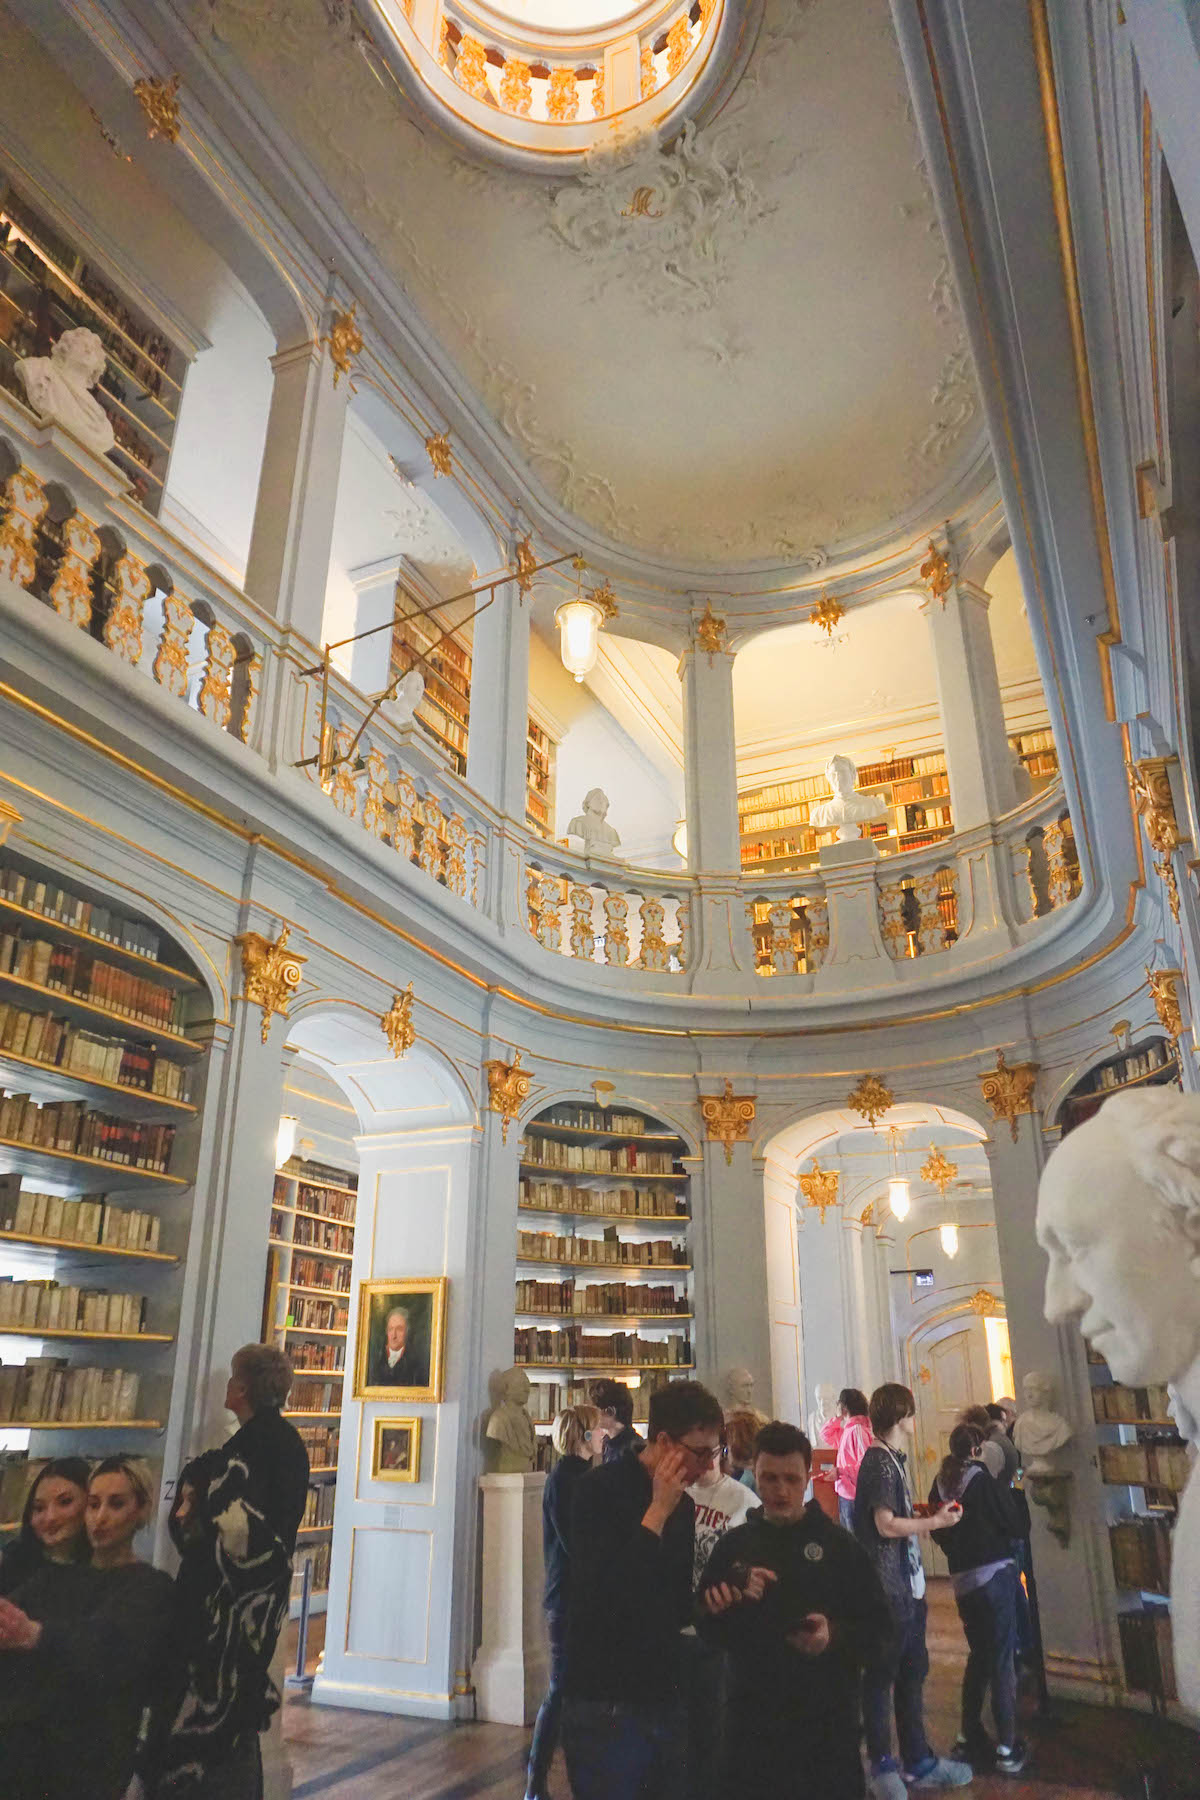 Interior of the Anna Amalia Library in Weimar, Germany 